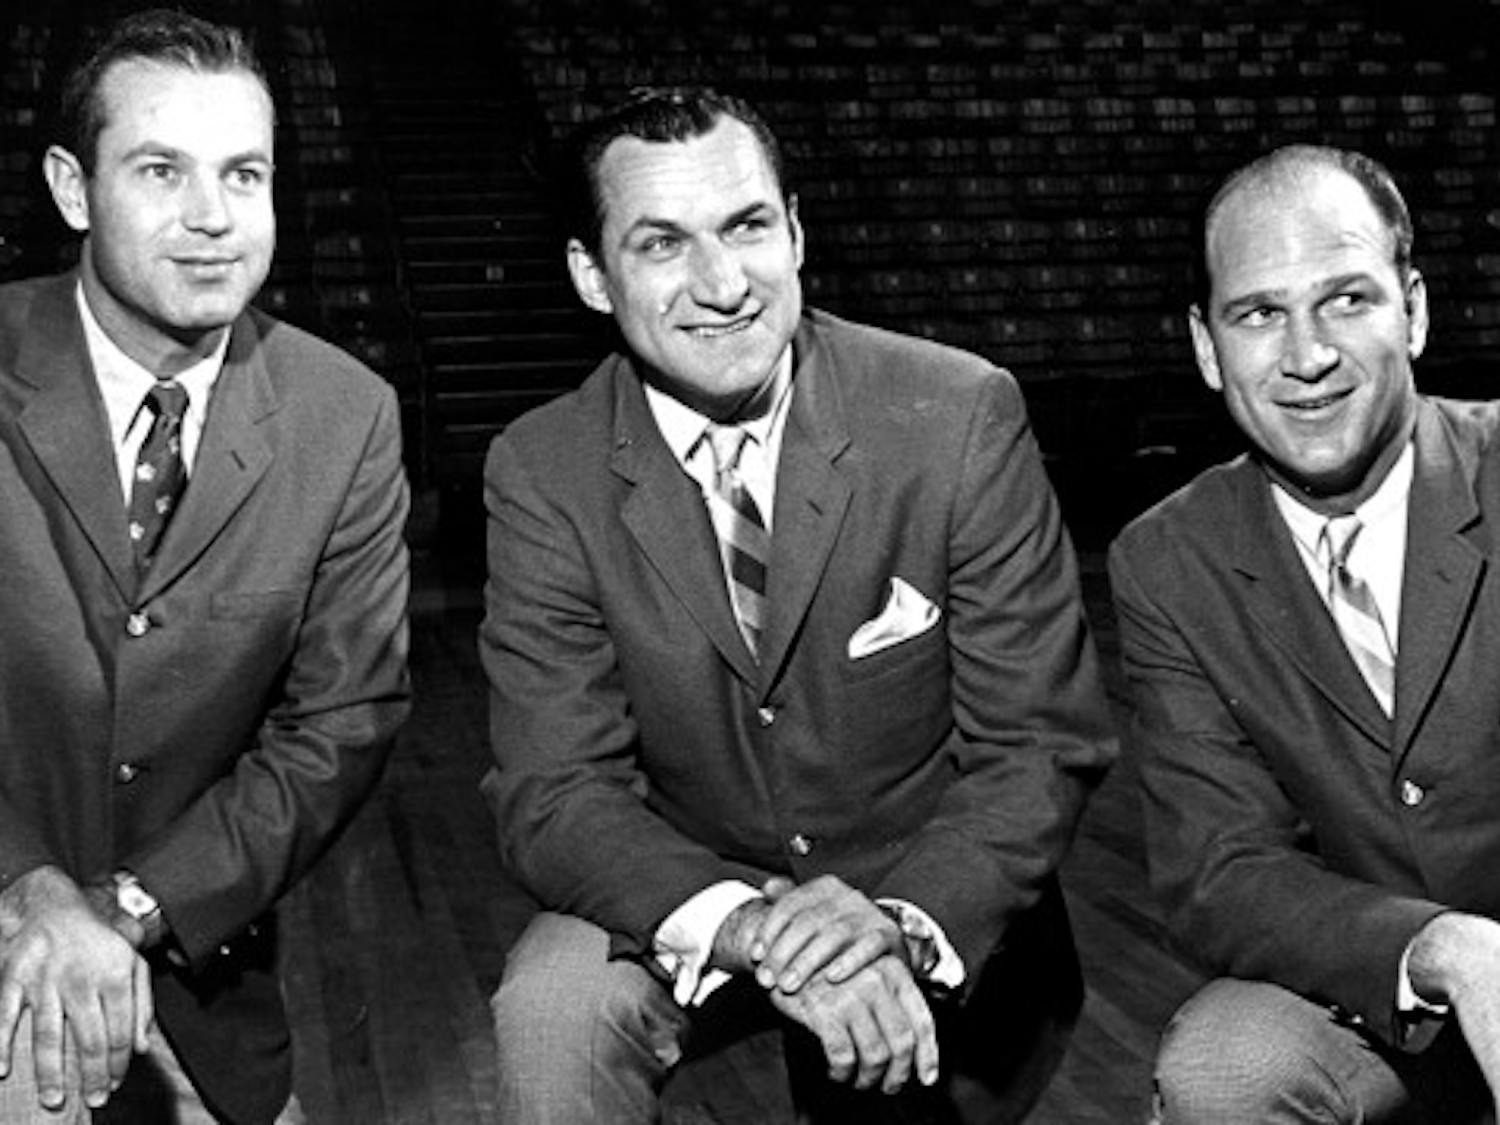 A young Guthridge with Dean Smith and John Lotz on the Tar Heel staff in the late 1960s.